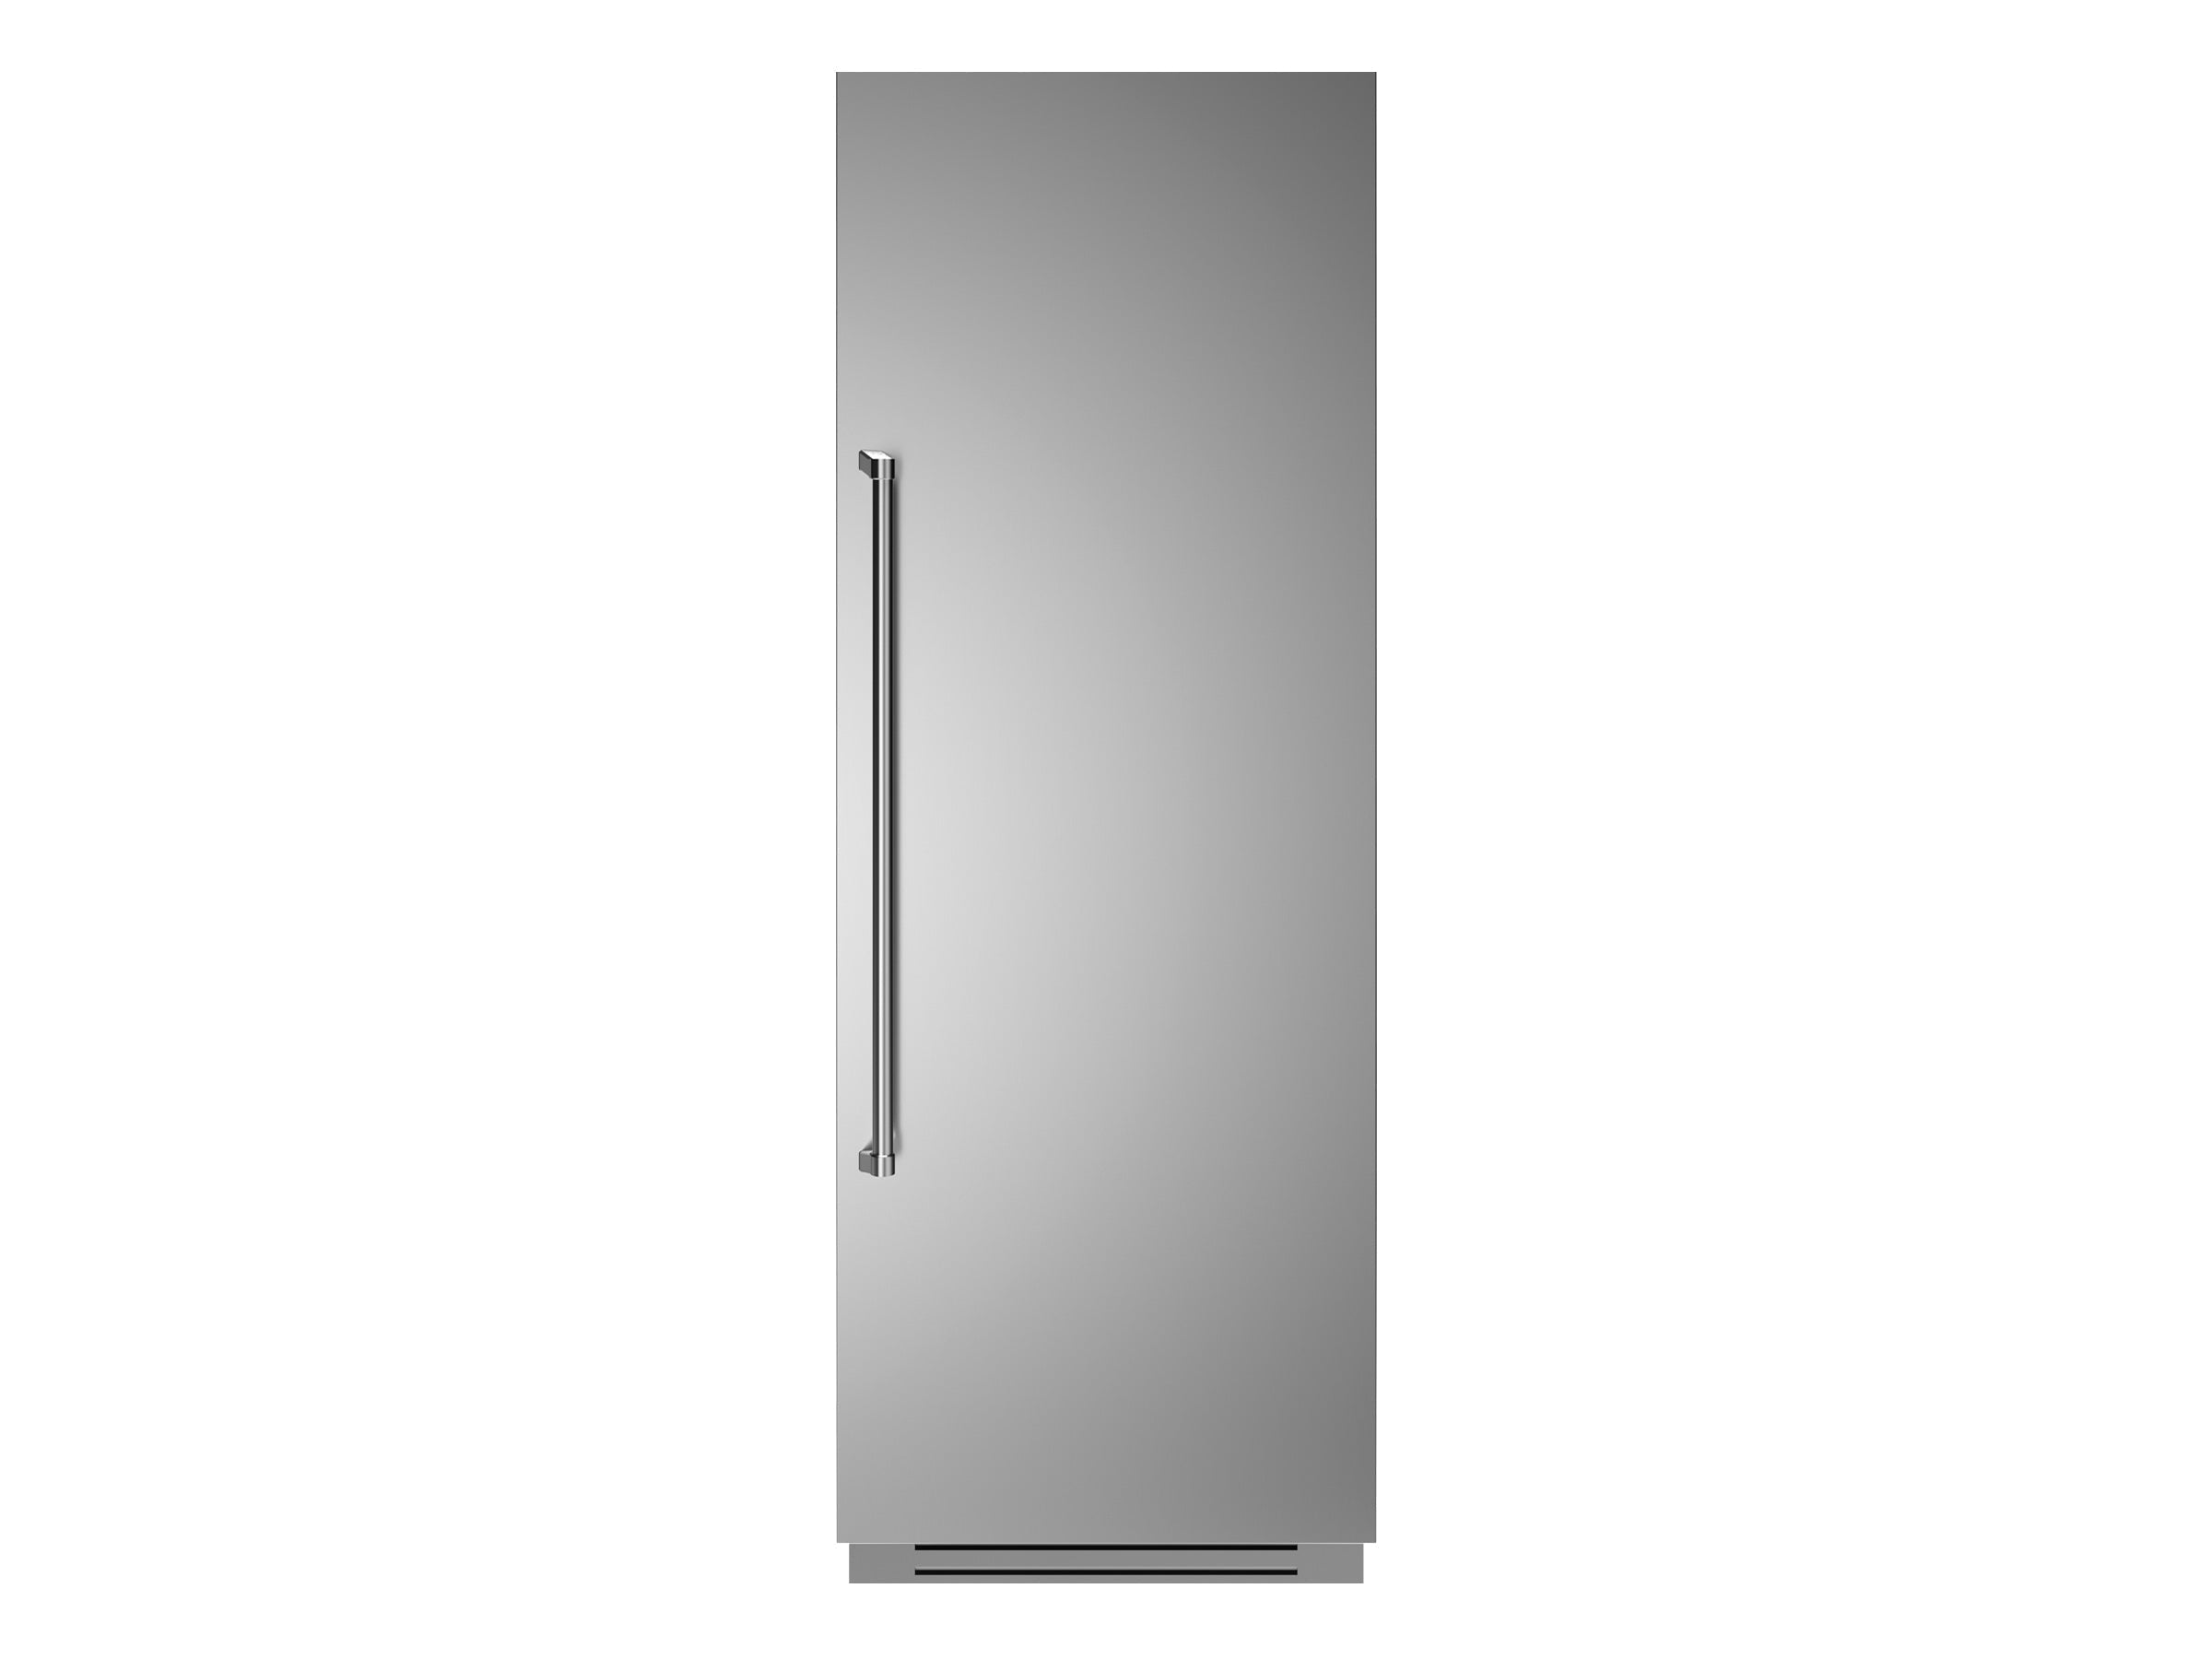 Bertazzoni 30" 17.4 Cu.Ft. Stainless Steel Built-in Refrigerator Column With Right Swing Door REF30RCPIXR/23 Luxury Appliances Direct